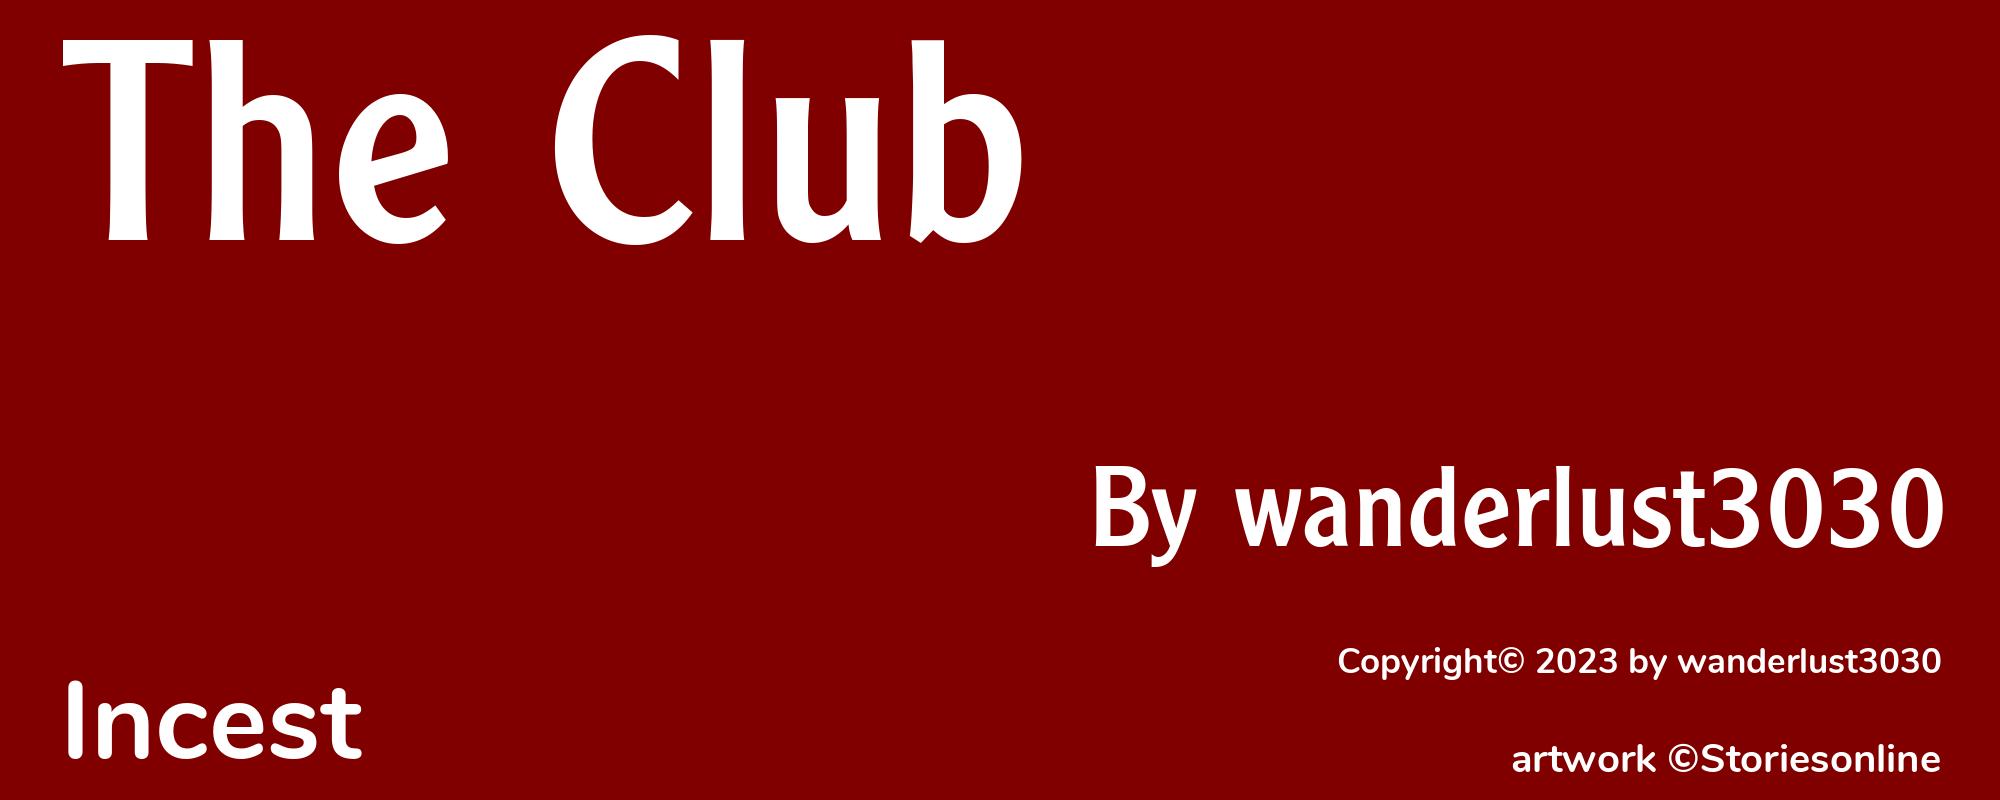 The Club - Cover